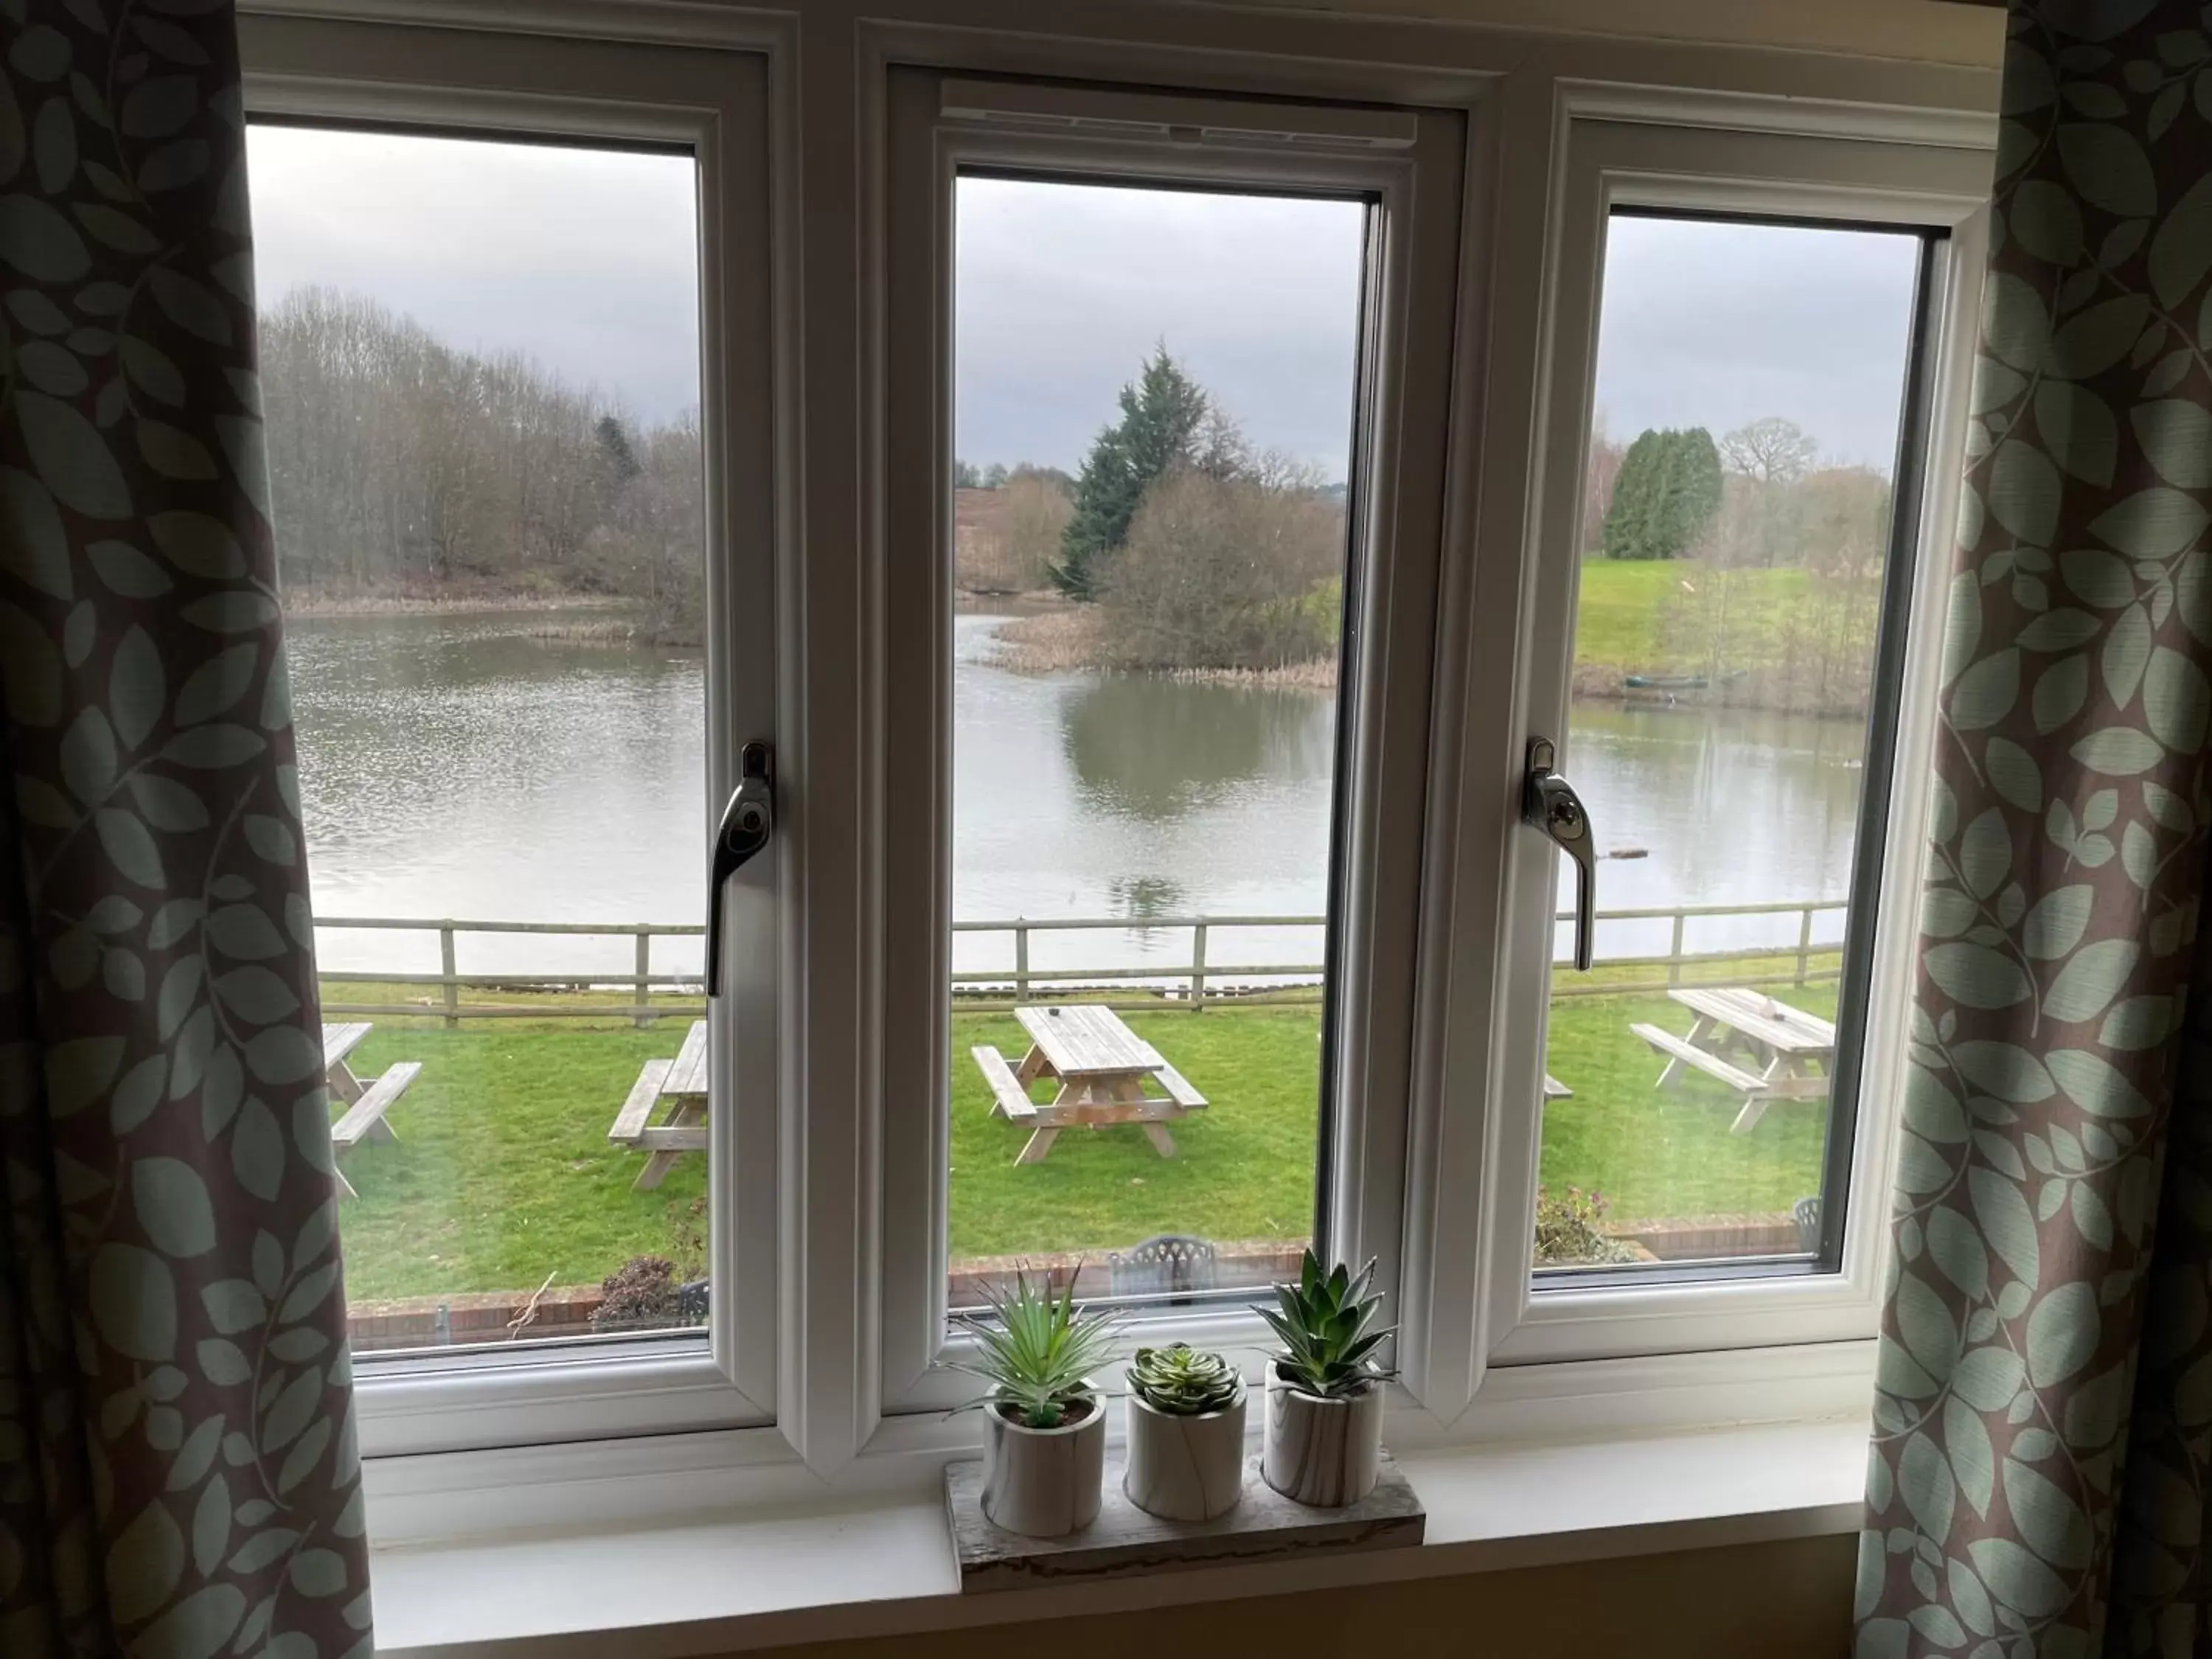 Lake view in Cadmore Lodge Bed & Breakfast